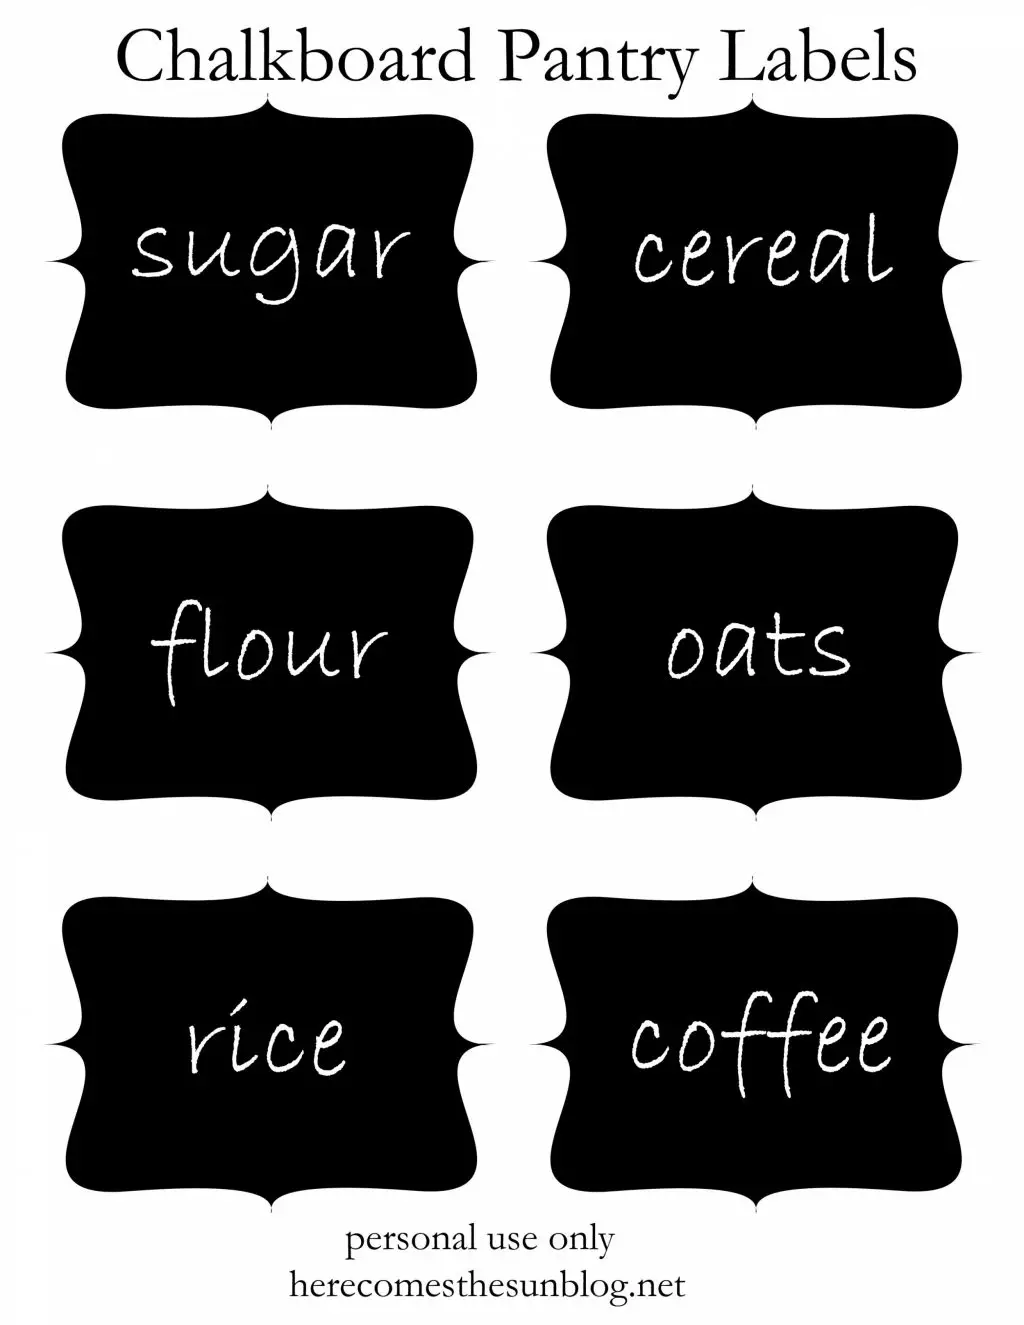 30 pretty kitchen or pantry labels kittybabylovecom